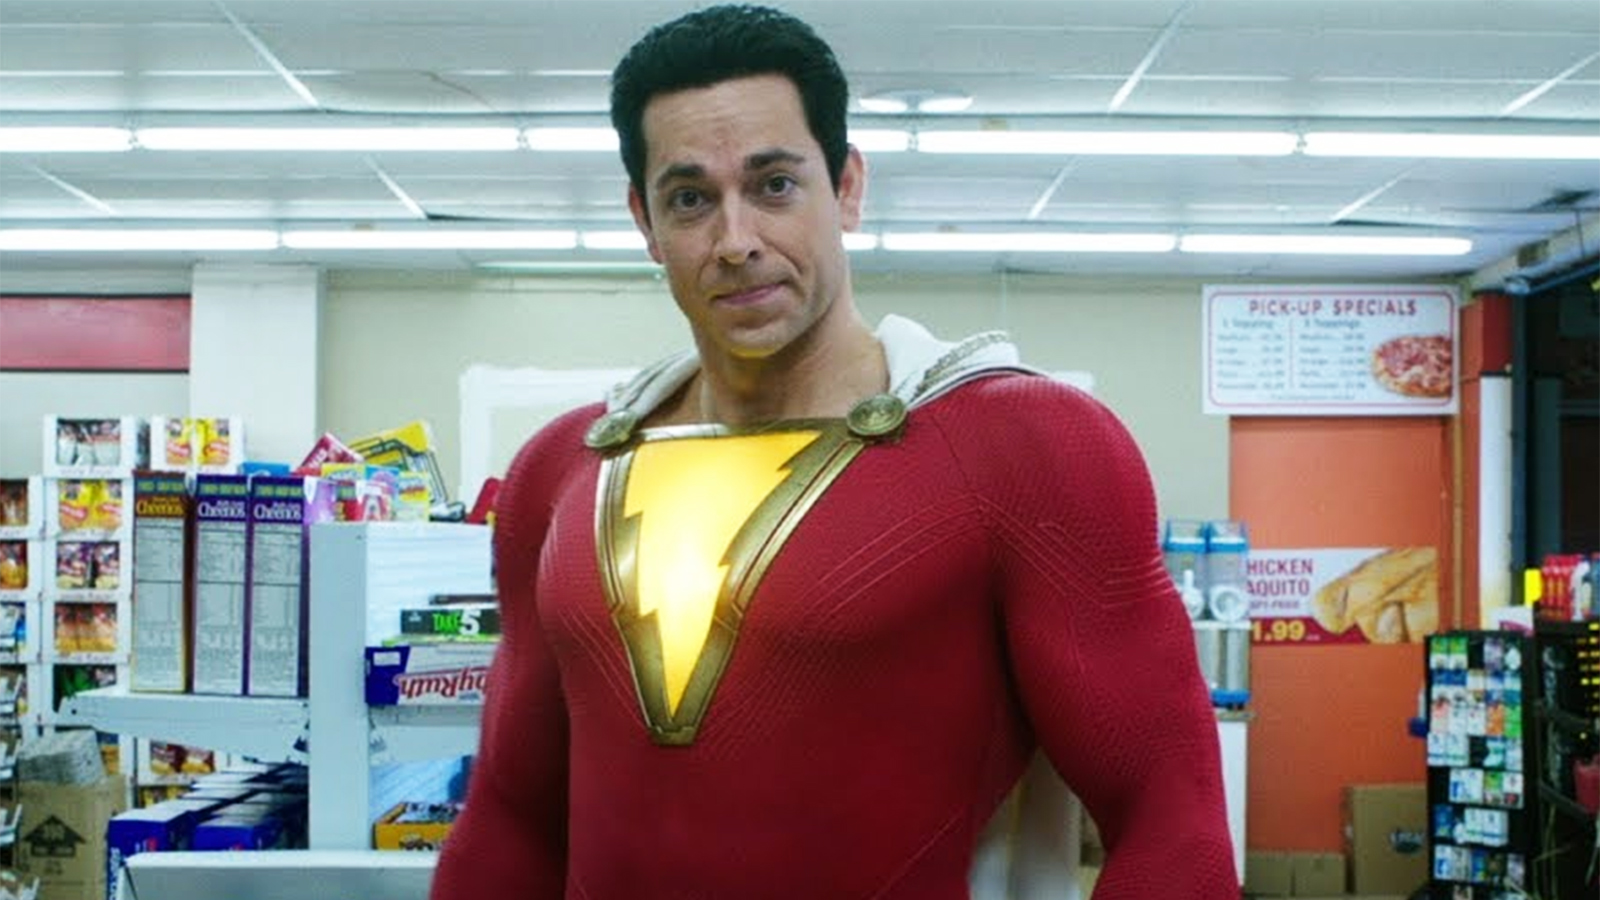 Shazam 2 director “surprised” by low Rotten Tomatoes score - Dexerto